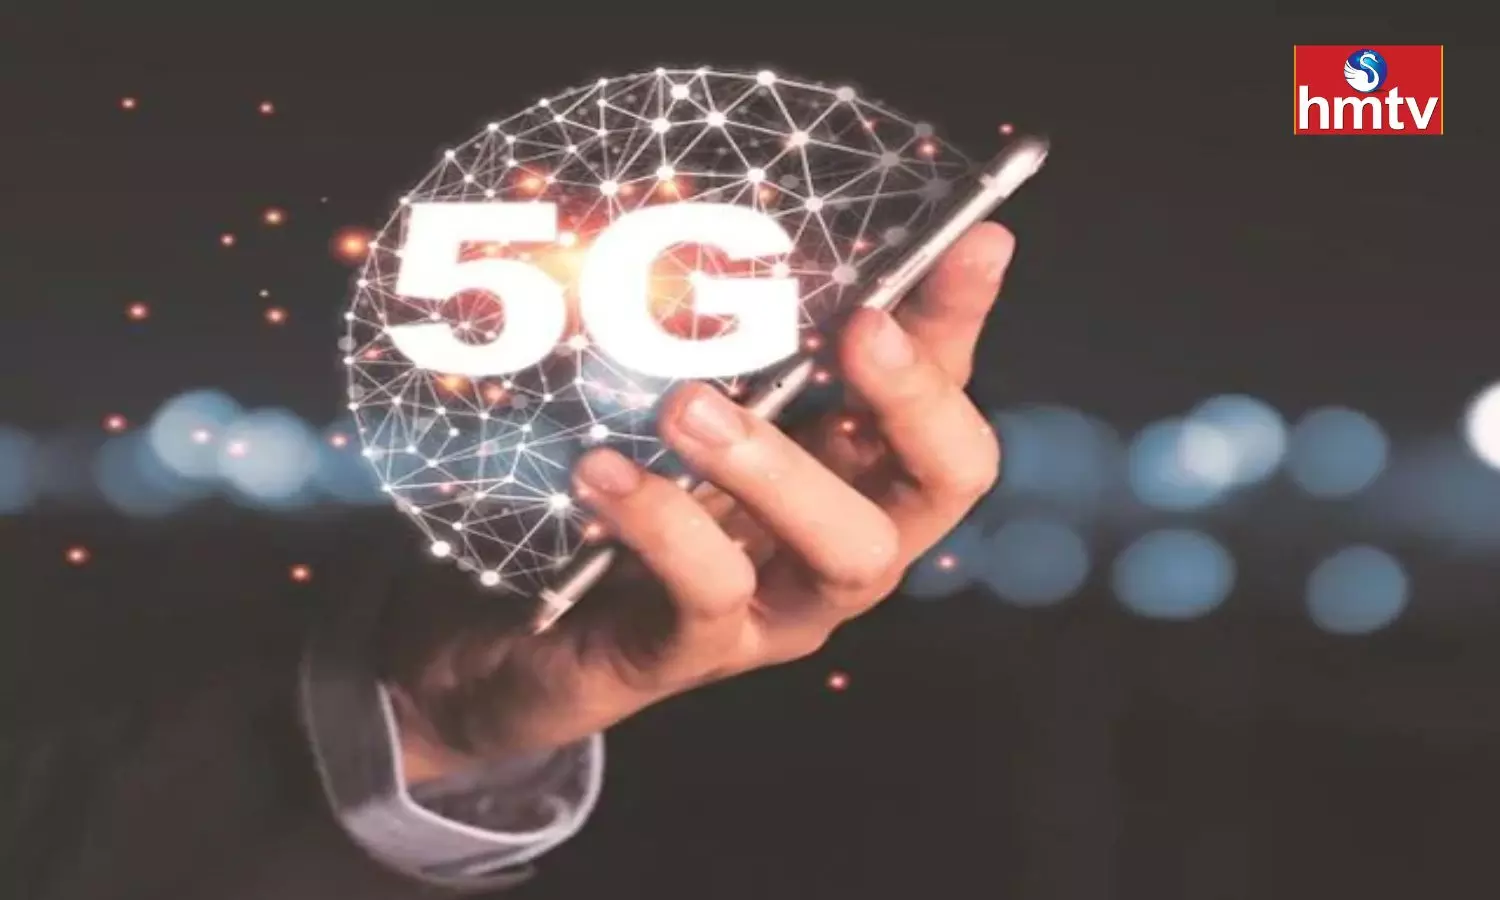 5G Will be Available in the First Phase of 600 Mbps Speed Know Important Things